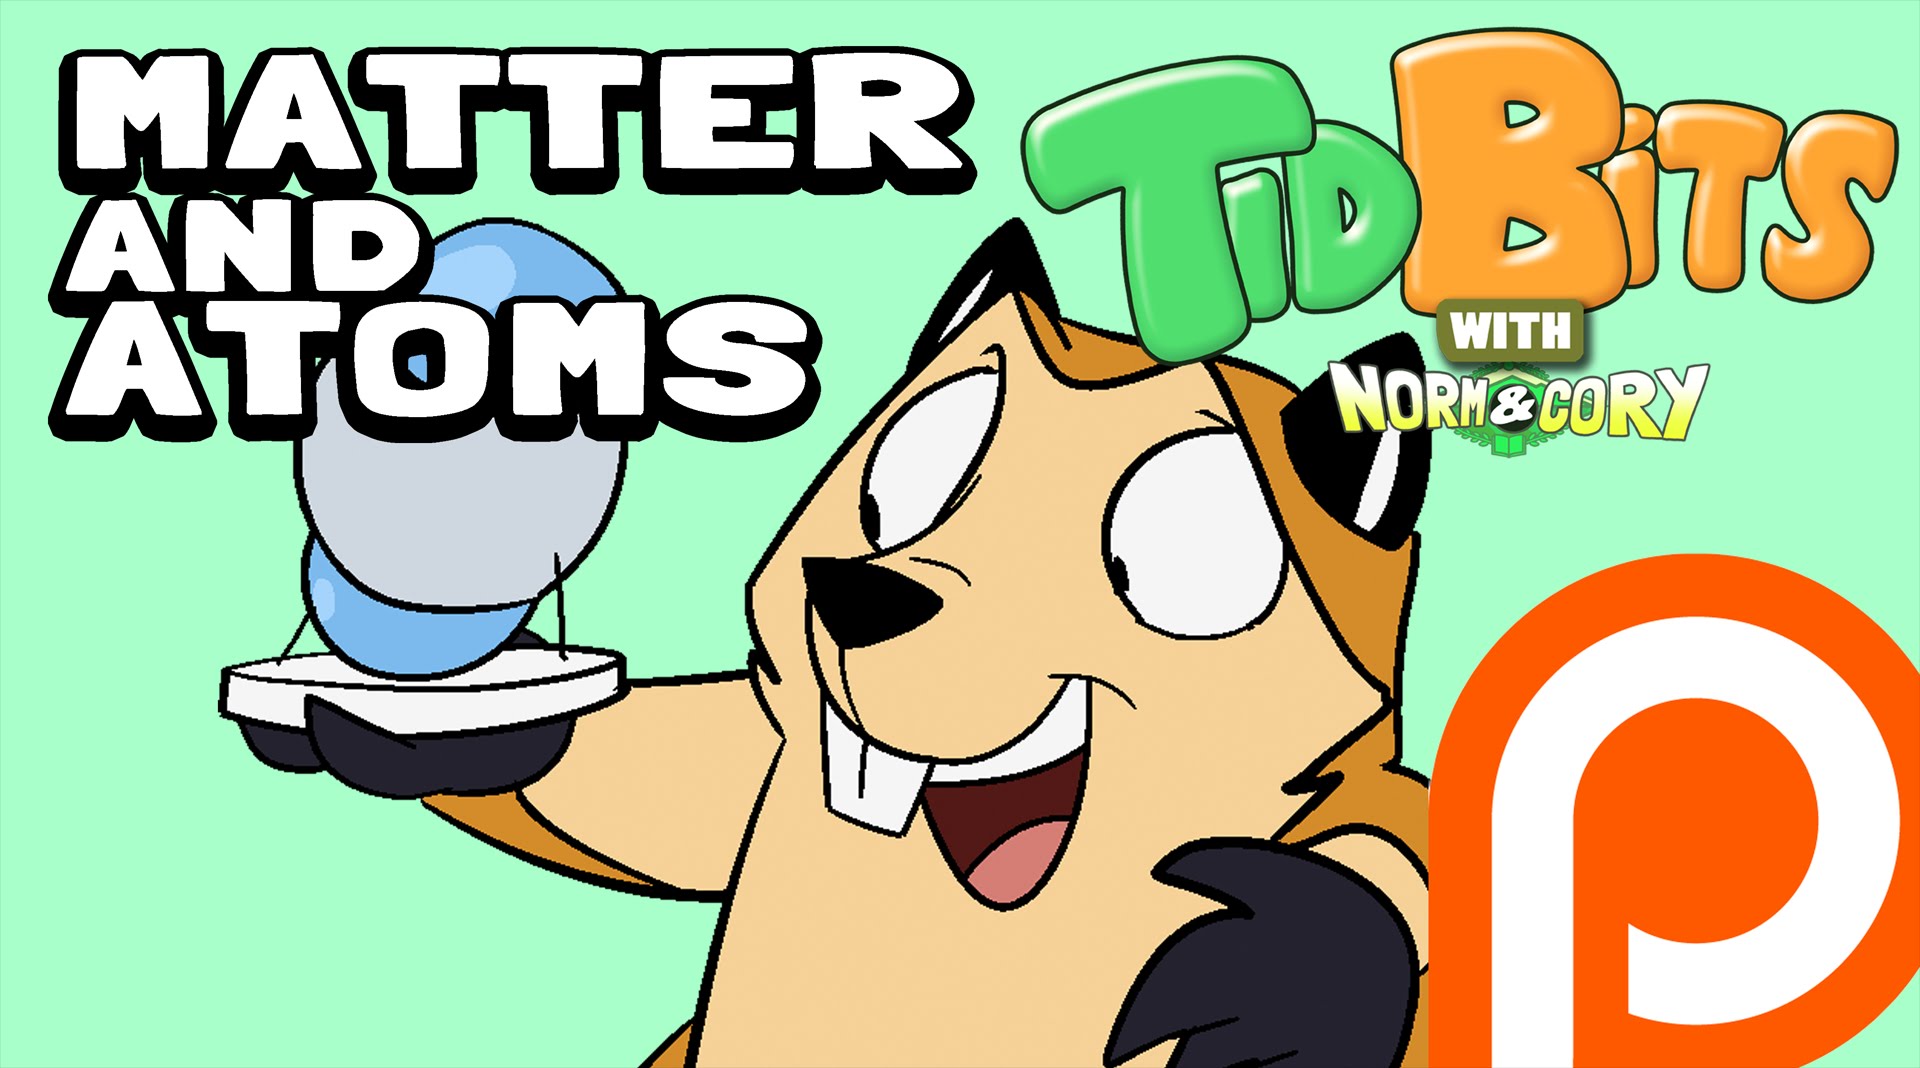 Norm & Cory – TidBits: MATTER AND ATOMS | Funny Science Cartoon ...